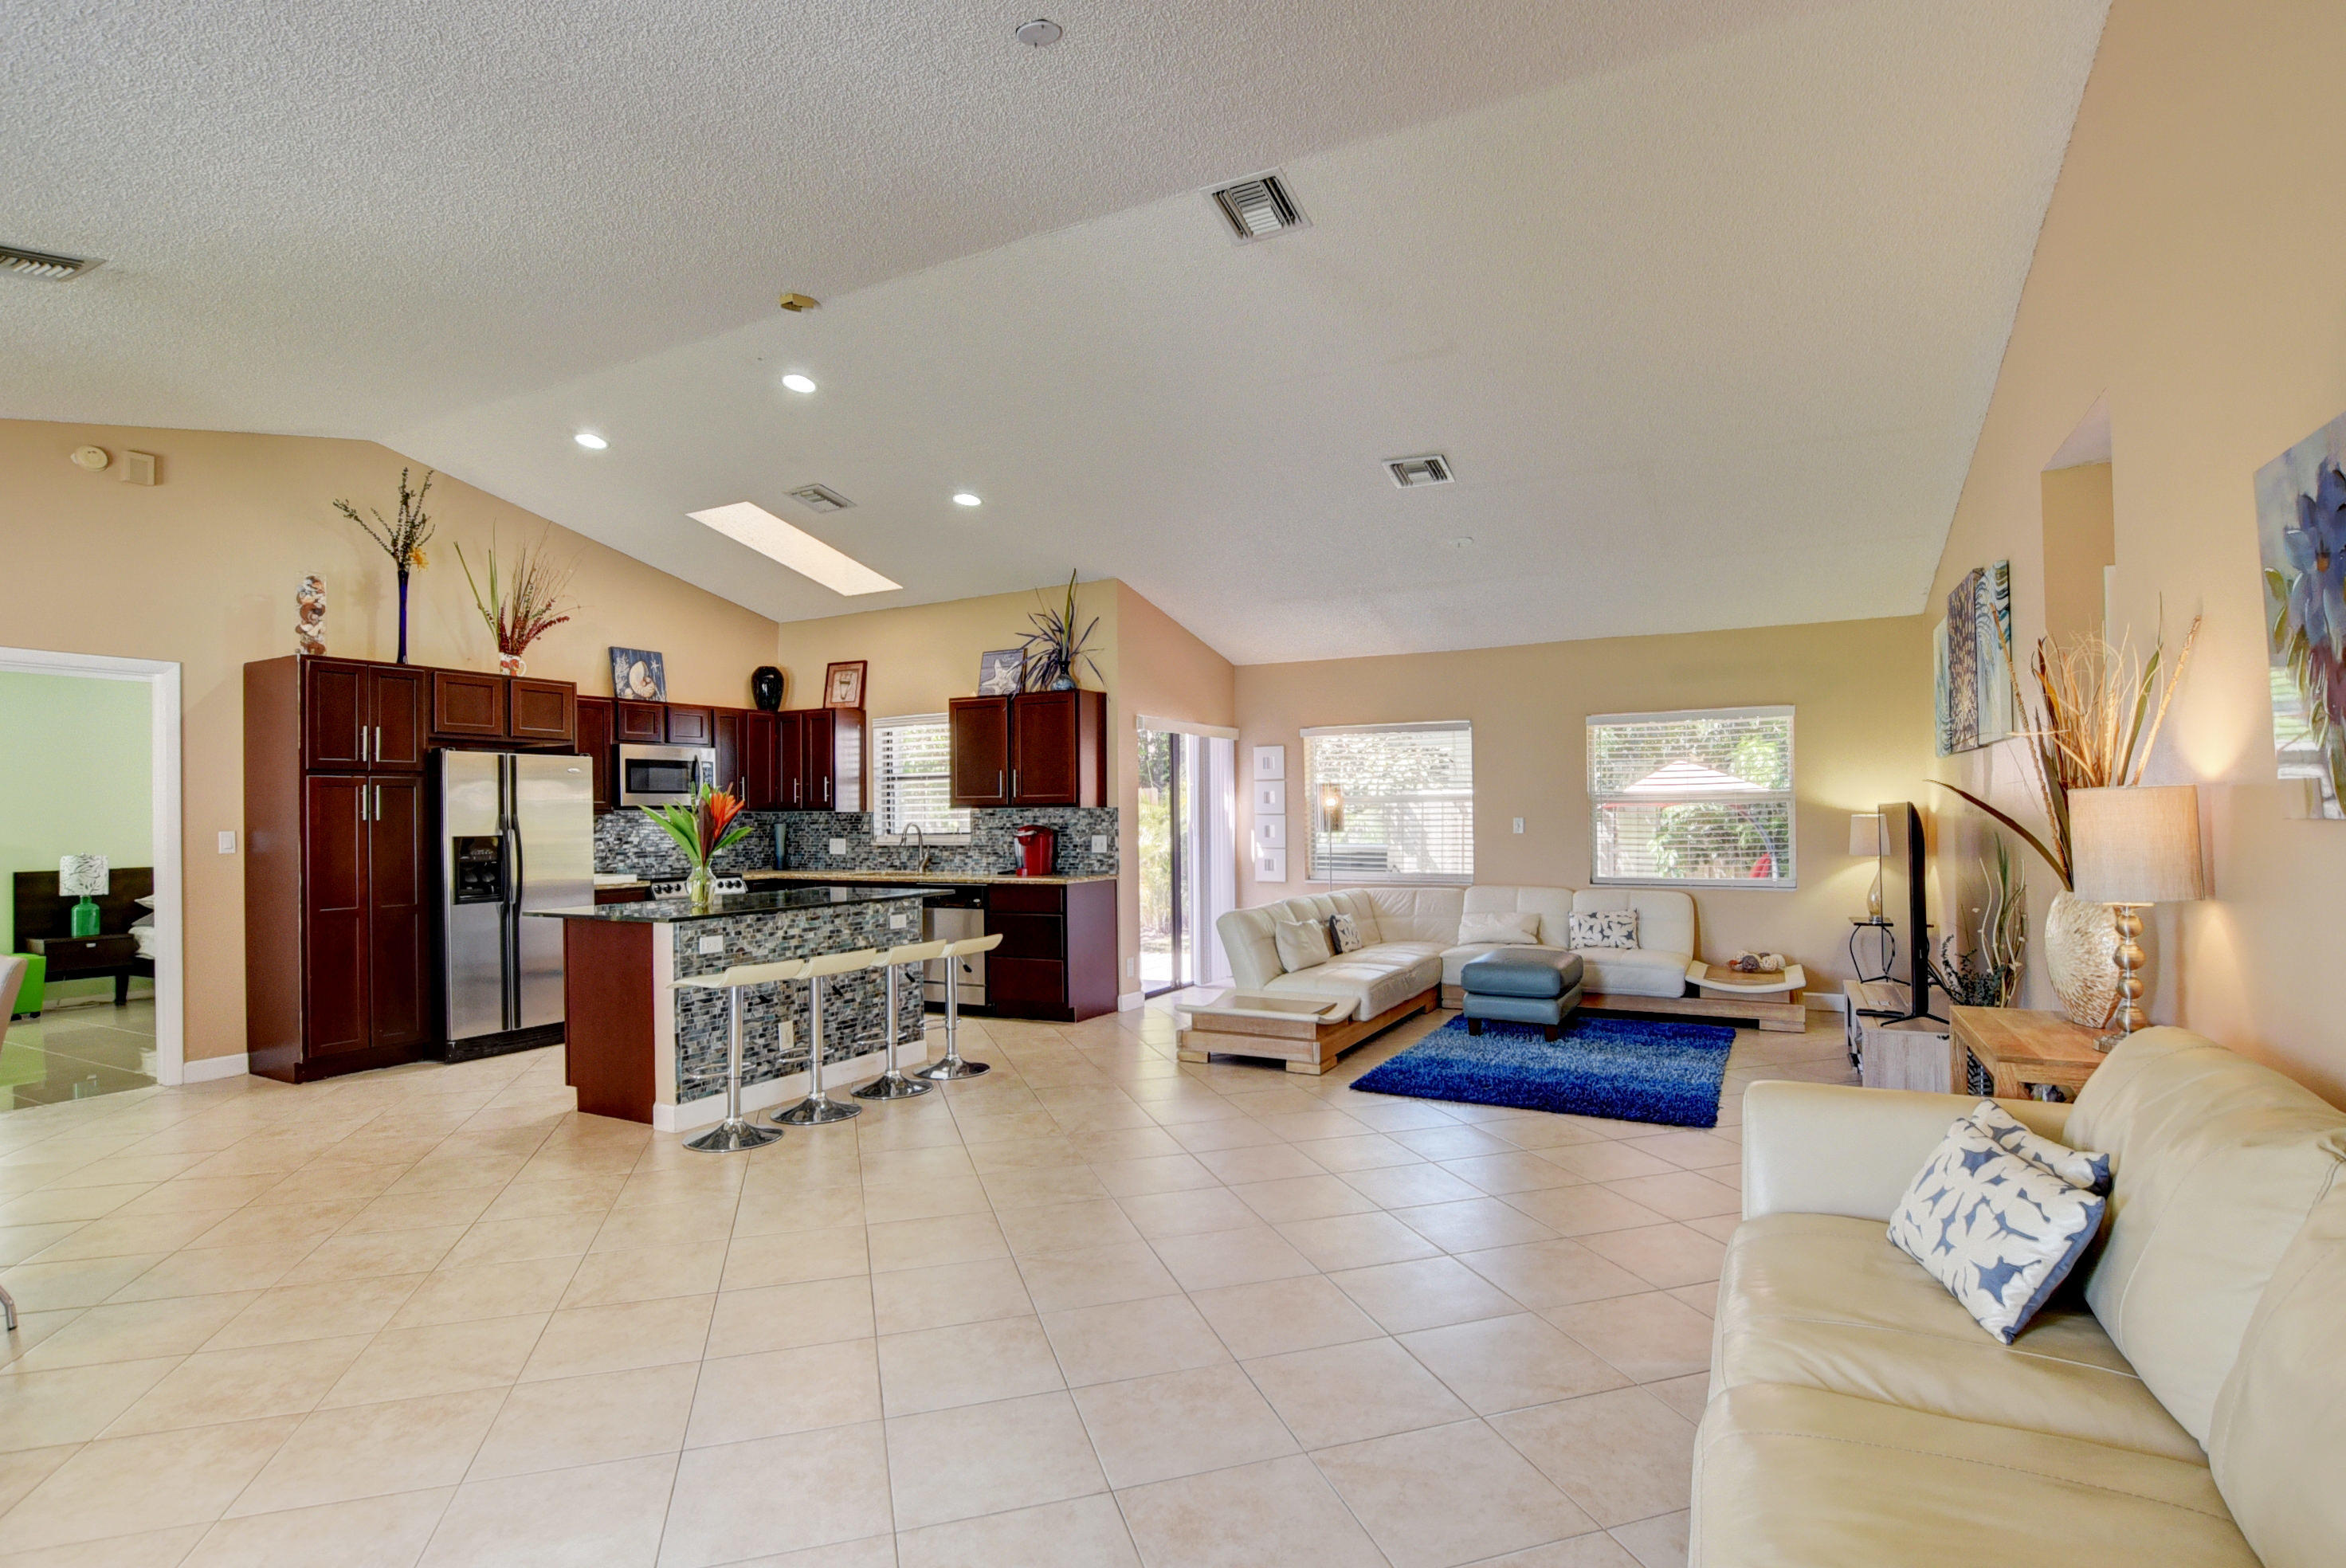 a living room with stainless steel appliances furniture a rug and a view of kitchen